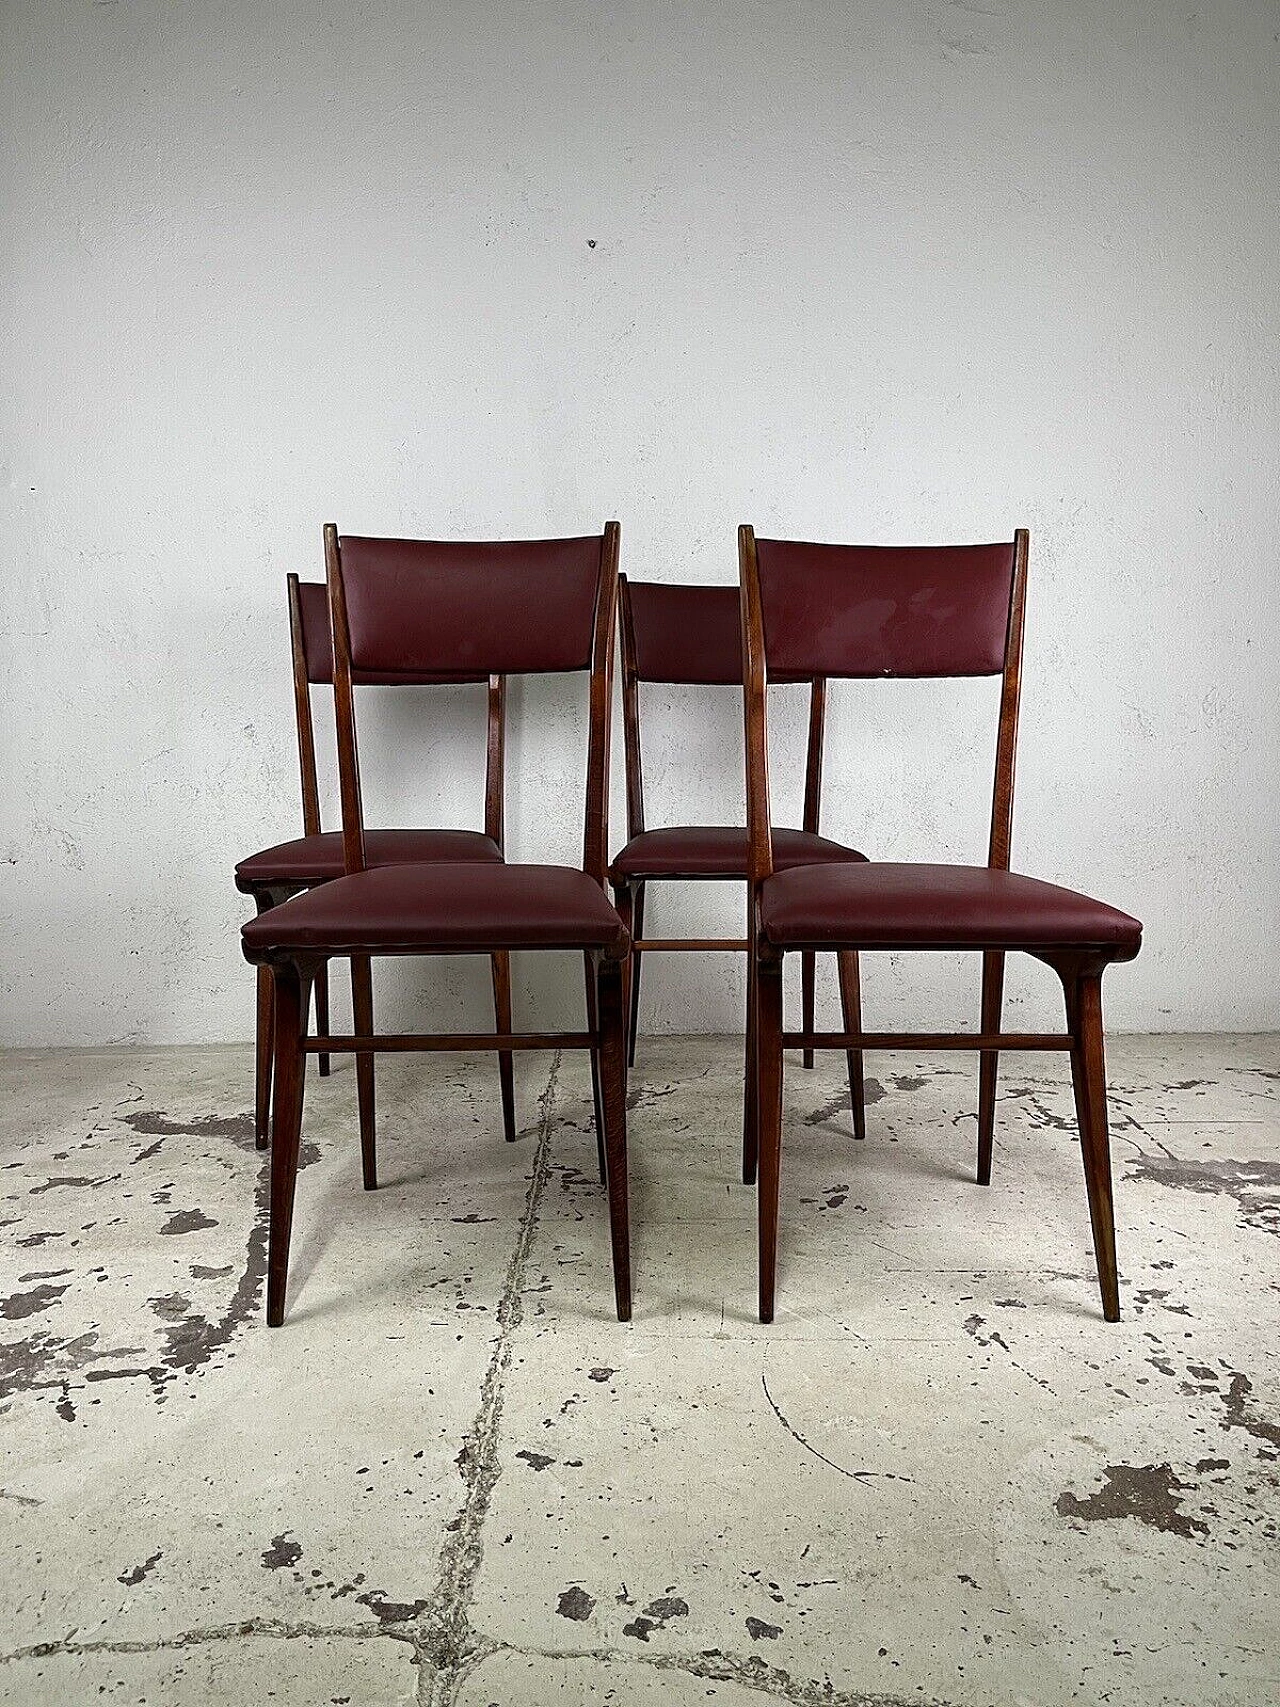 4 Chairs in wood and burgundy leatherette, 1950s 1